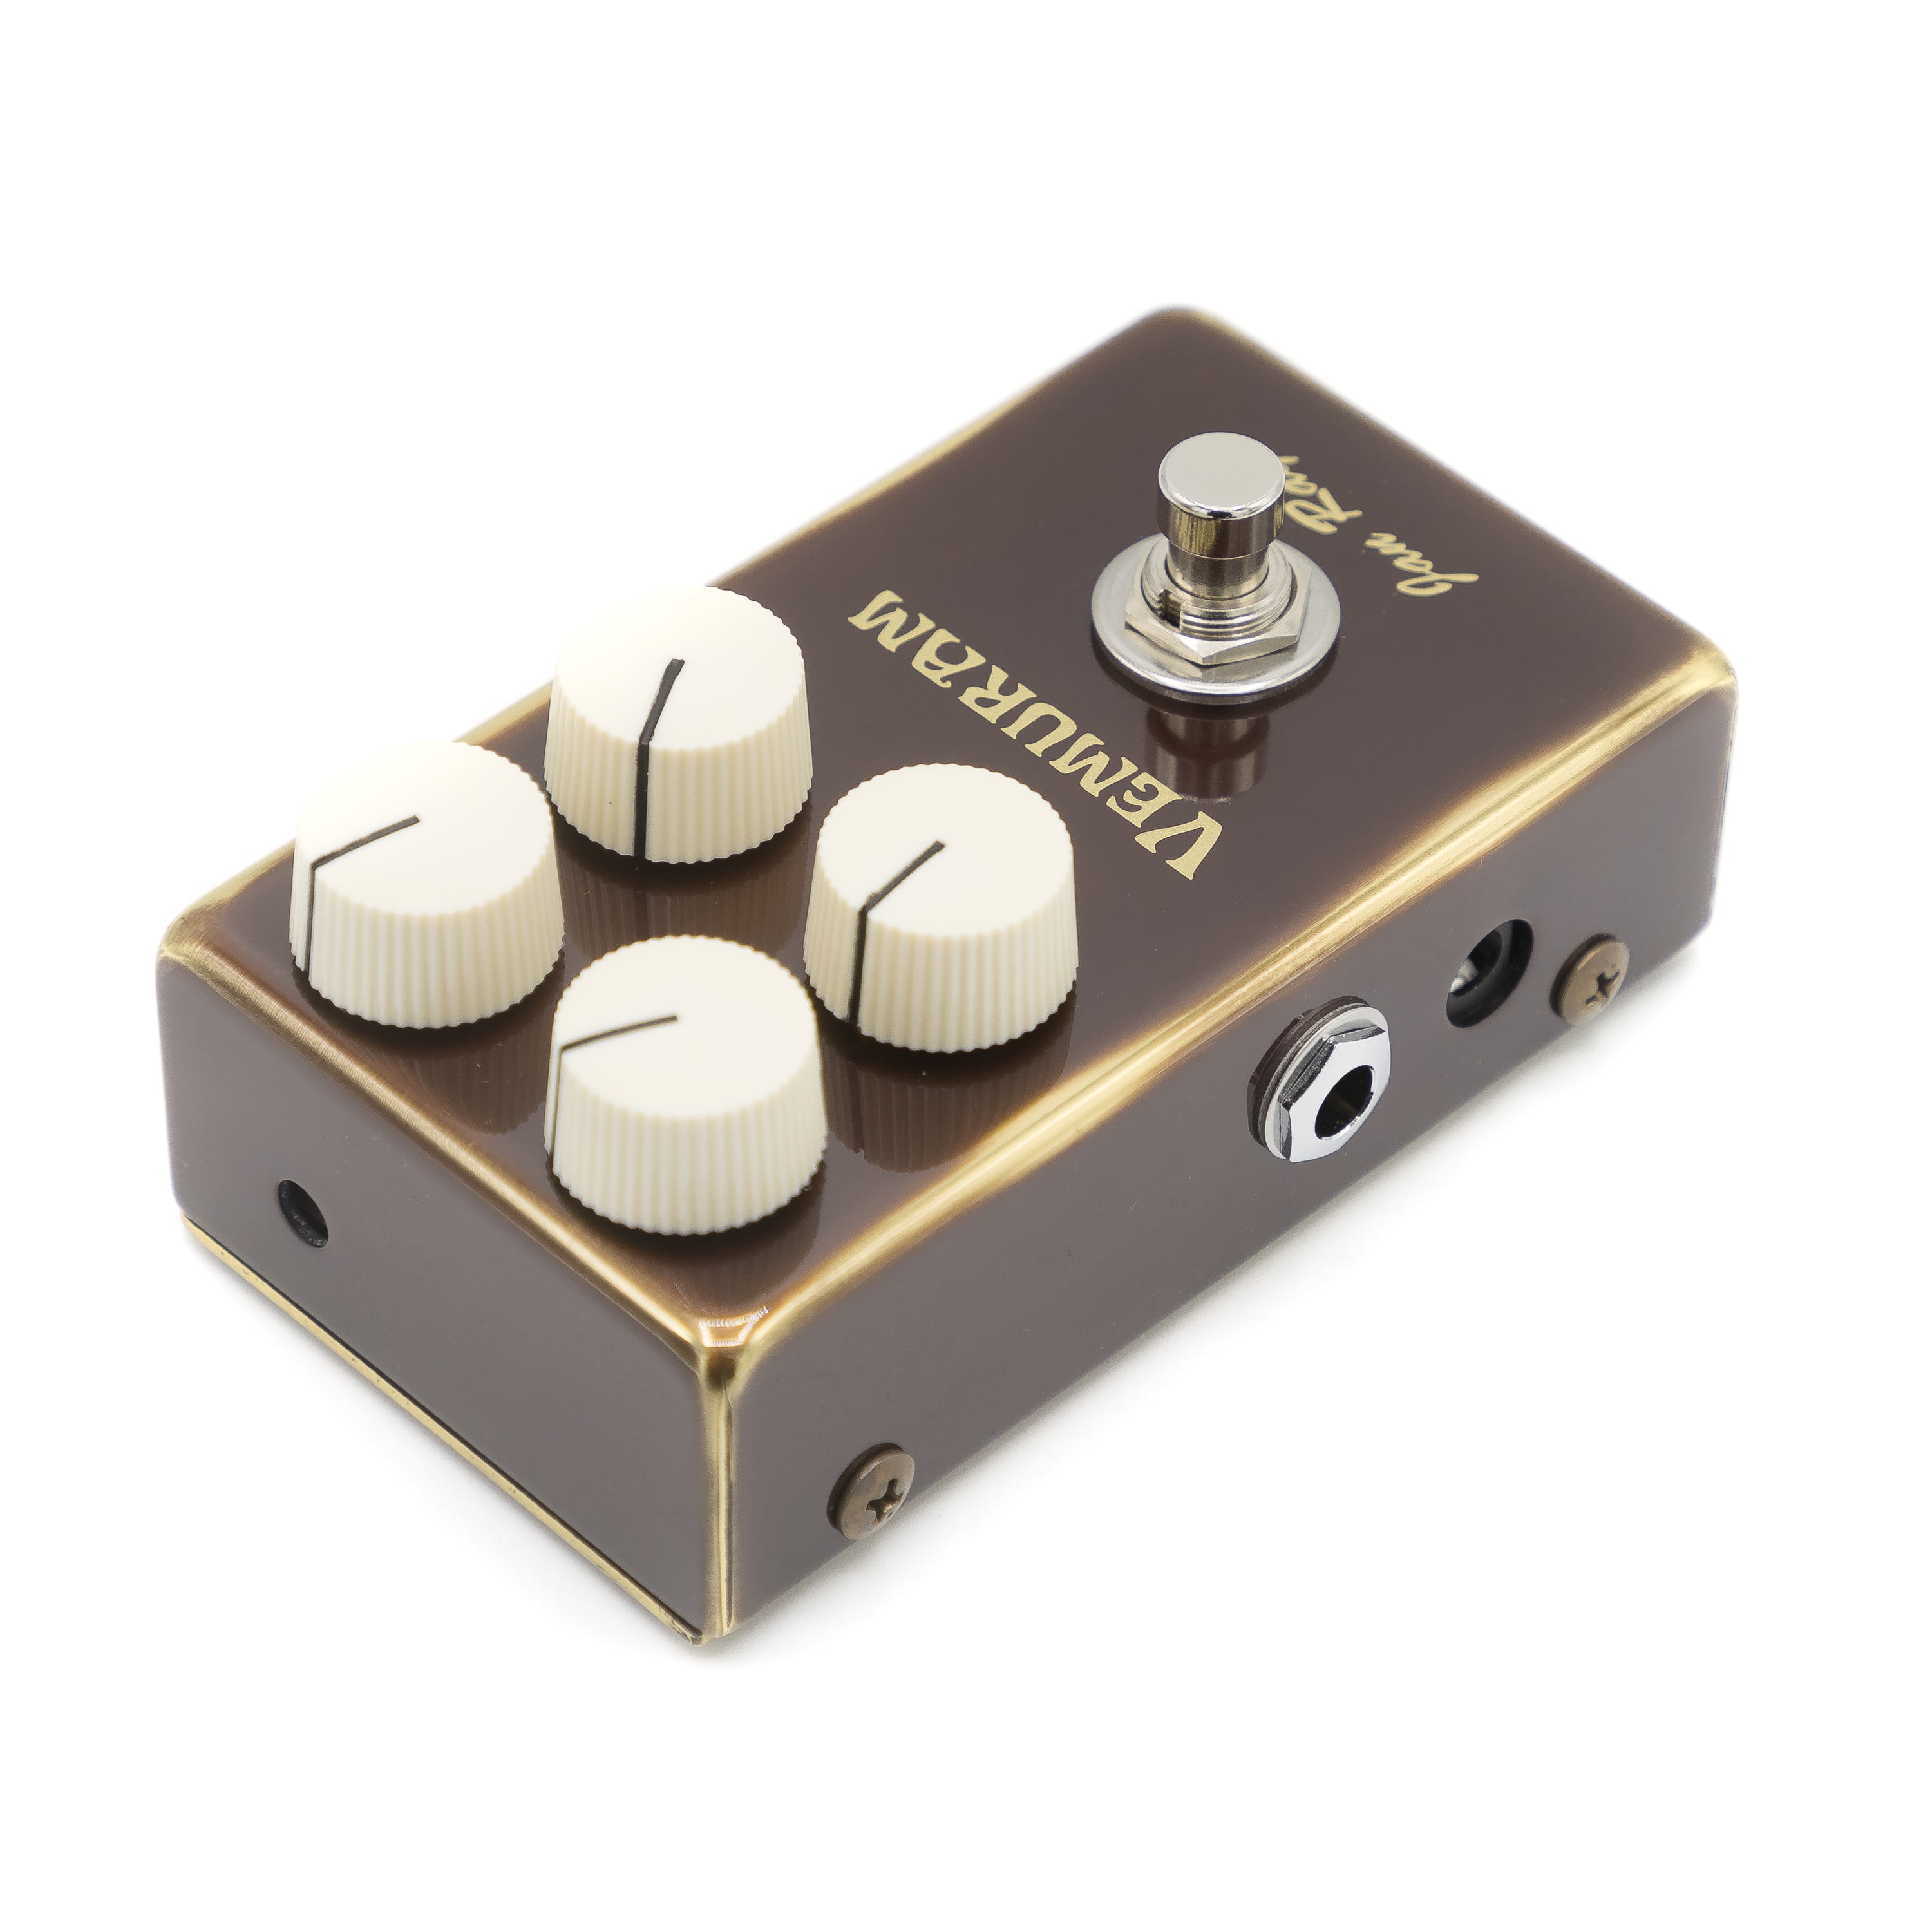 Vemuram Pedals - Jan Ray - Boost to Overdrive | Mass Street Music